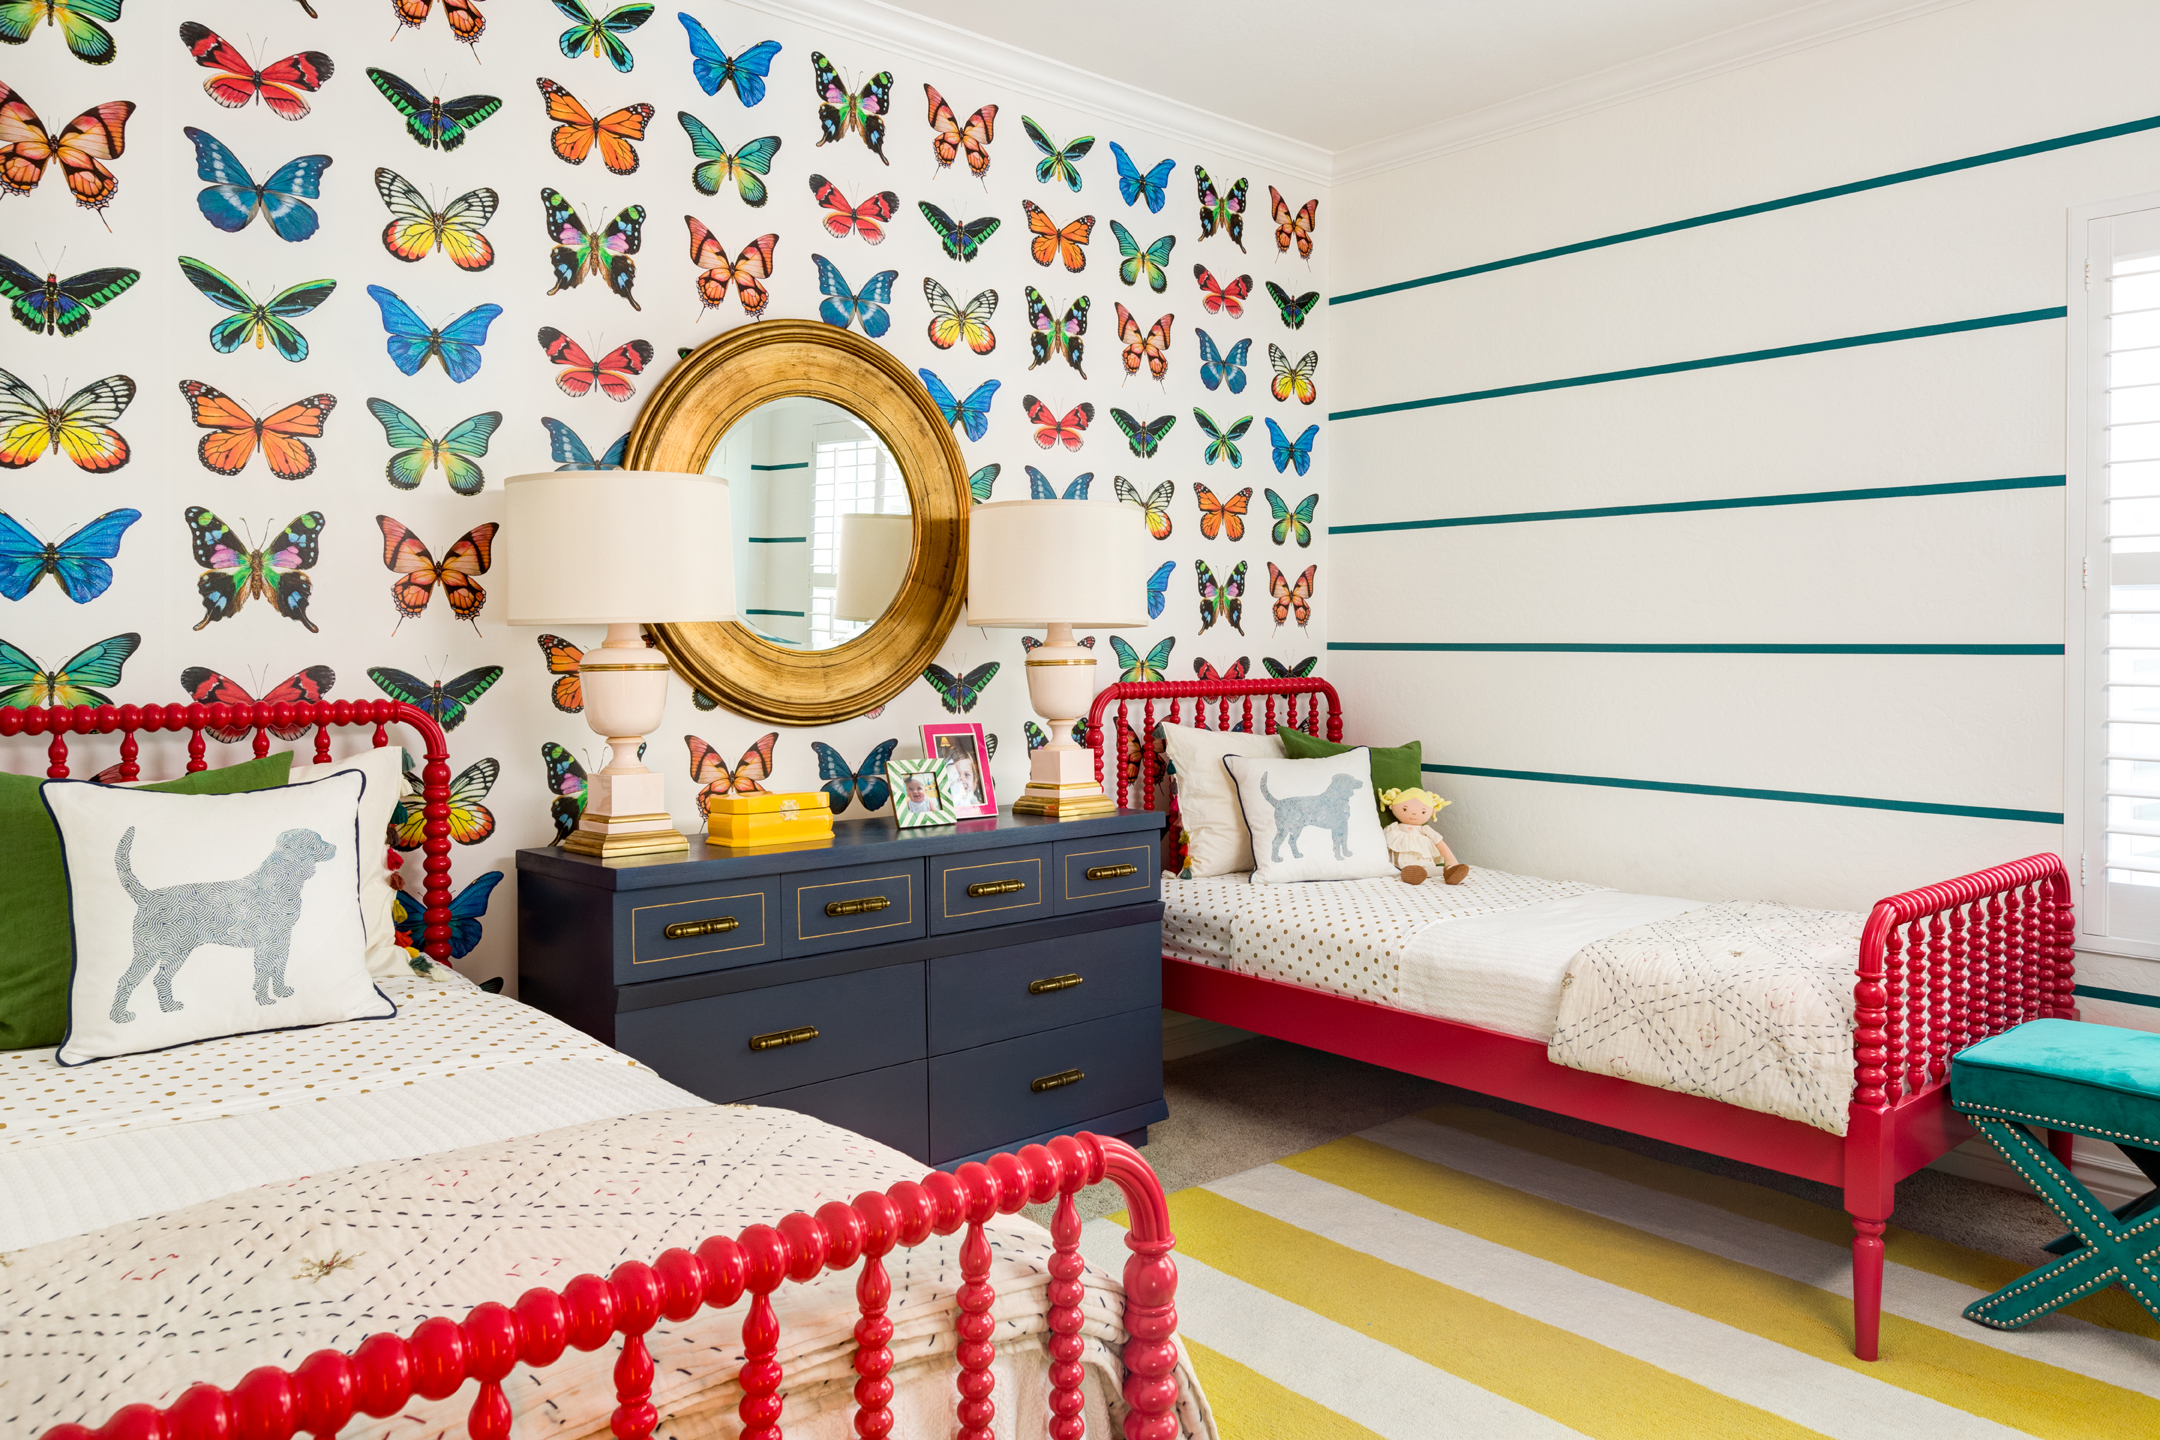 Butterfly Decor For Bedroom